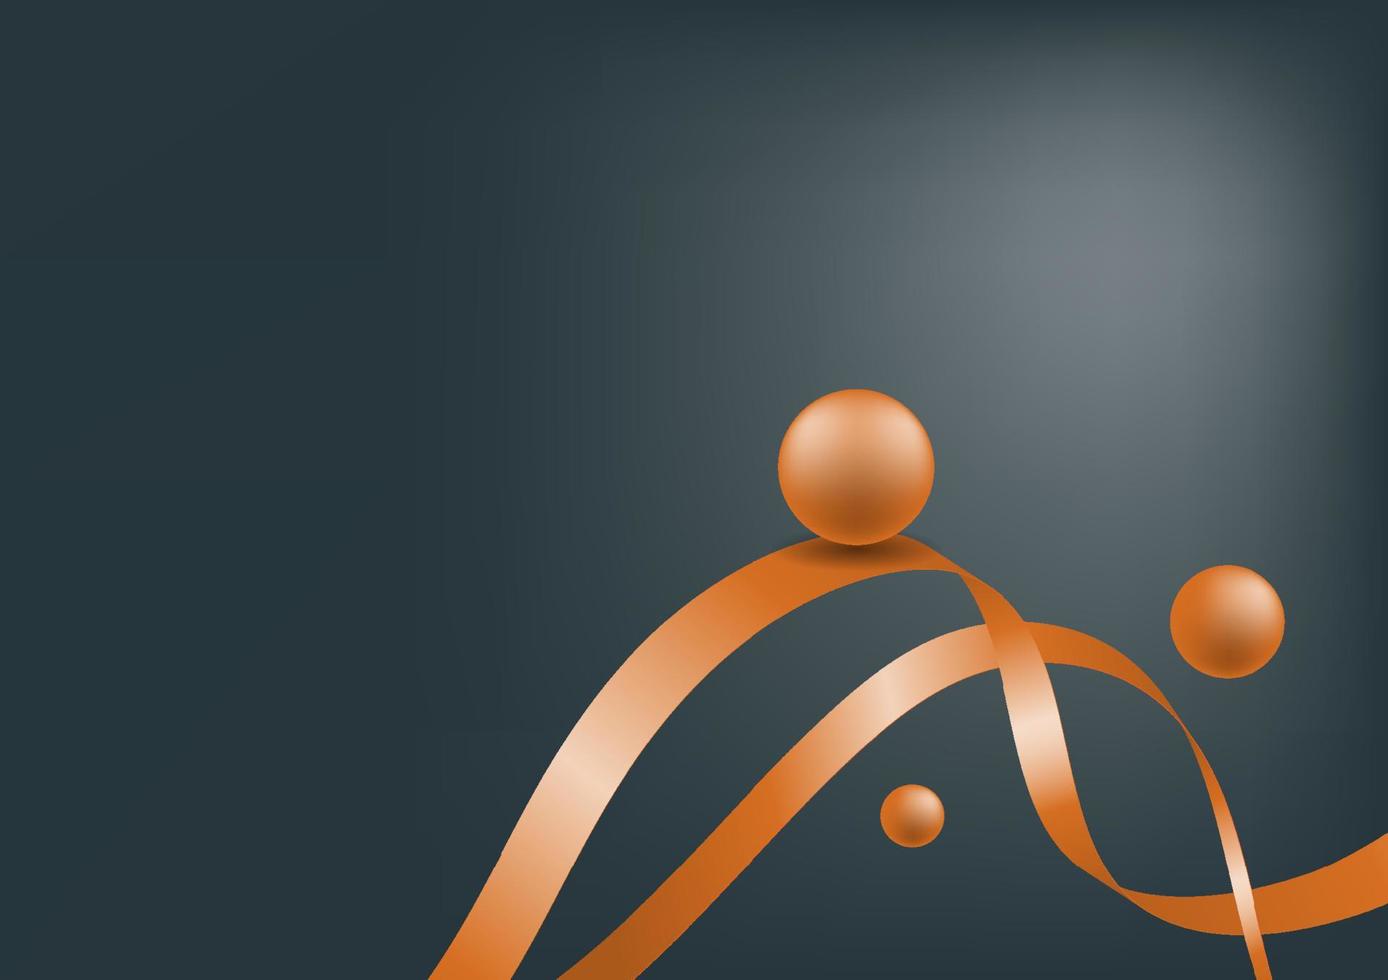 Abstract orange ribbons and balls background. vector